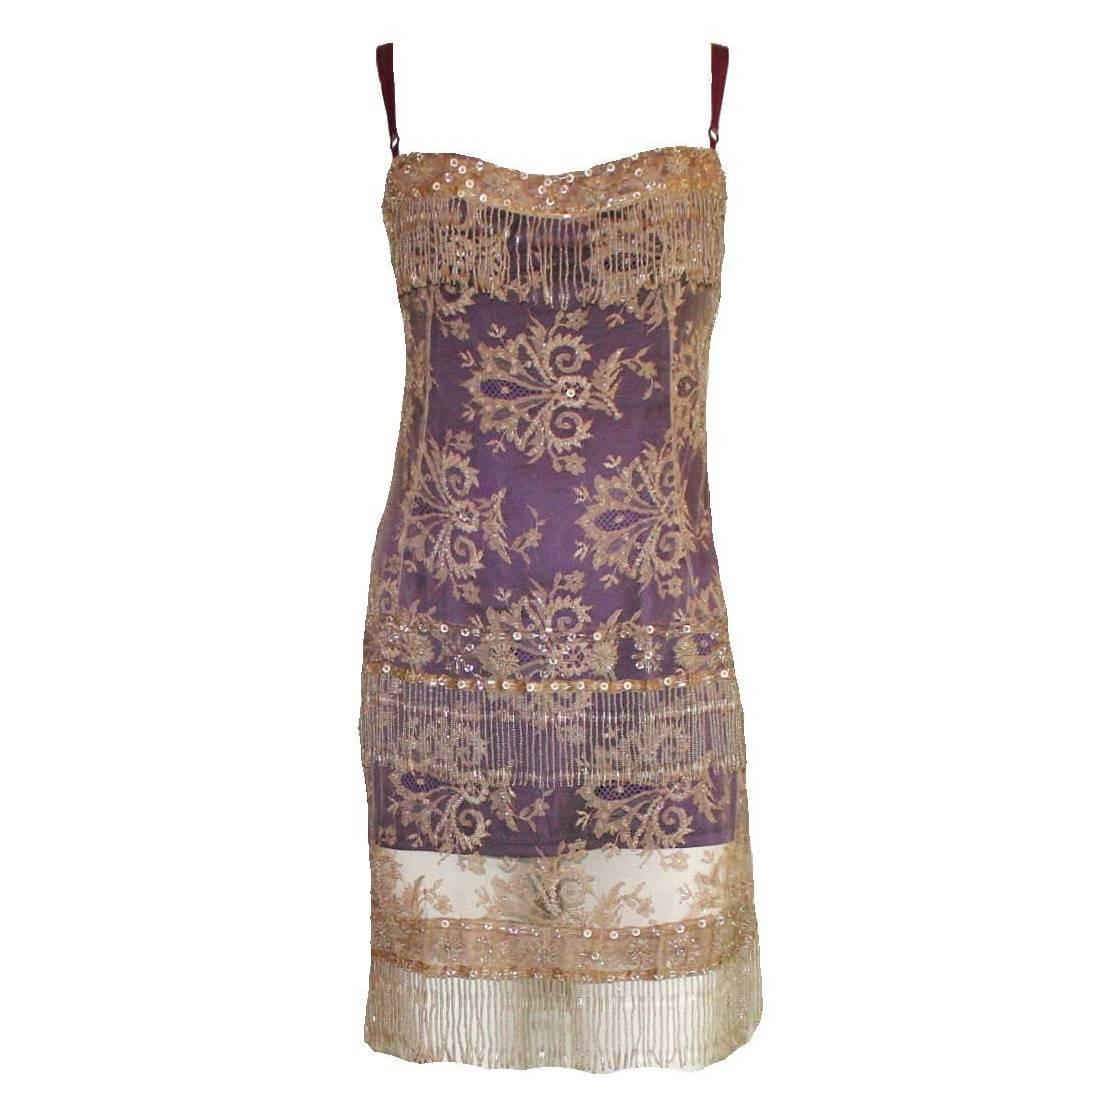 DOLCE & GABBANA Carrie's SATC 1990s Couture Hand-Embroidered Corset Dress 40 For Sale